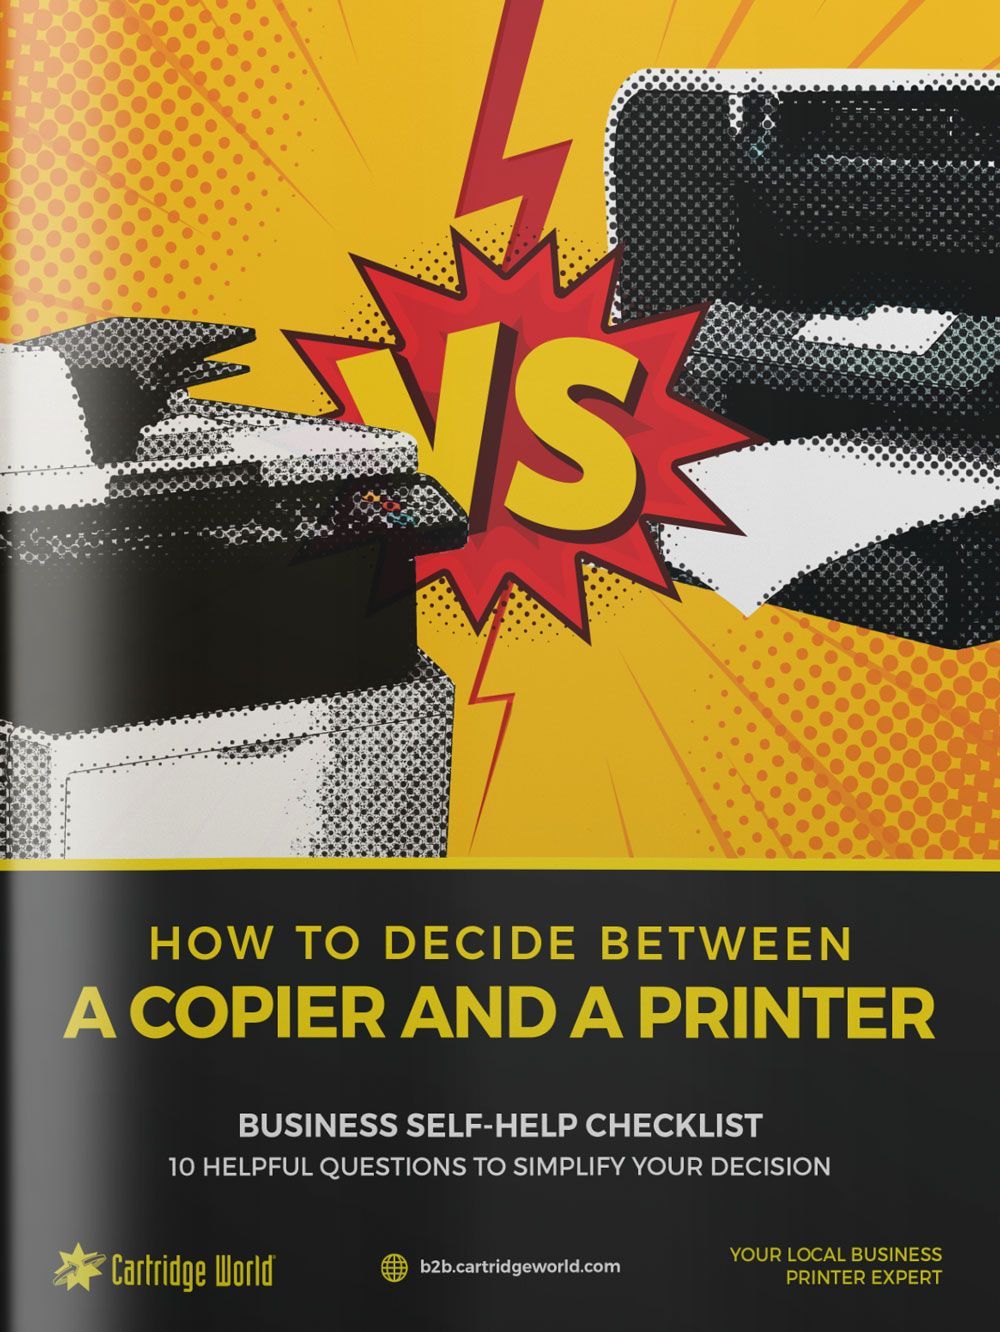 How to Decide Between a Copier and a Printer